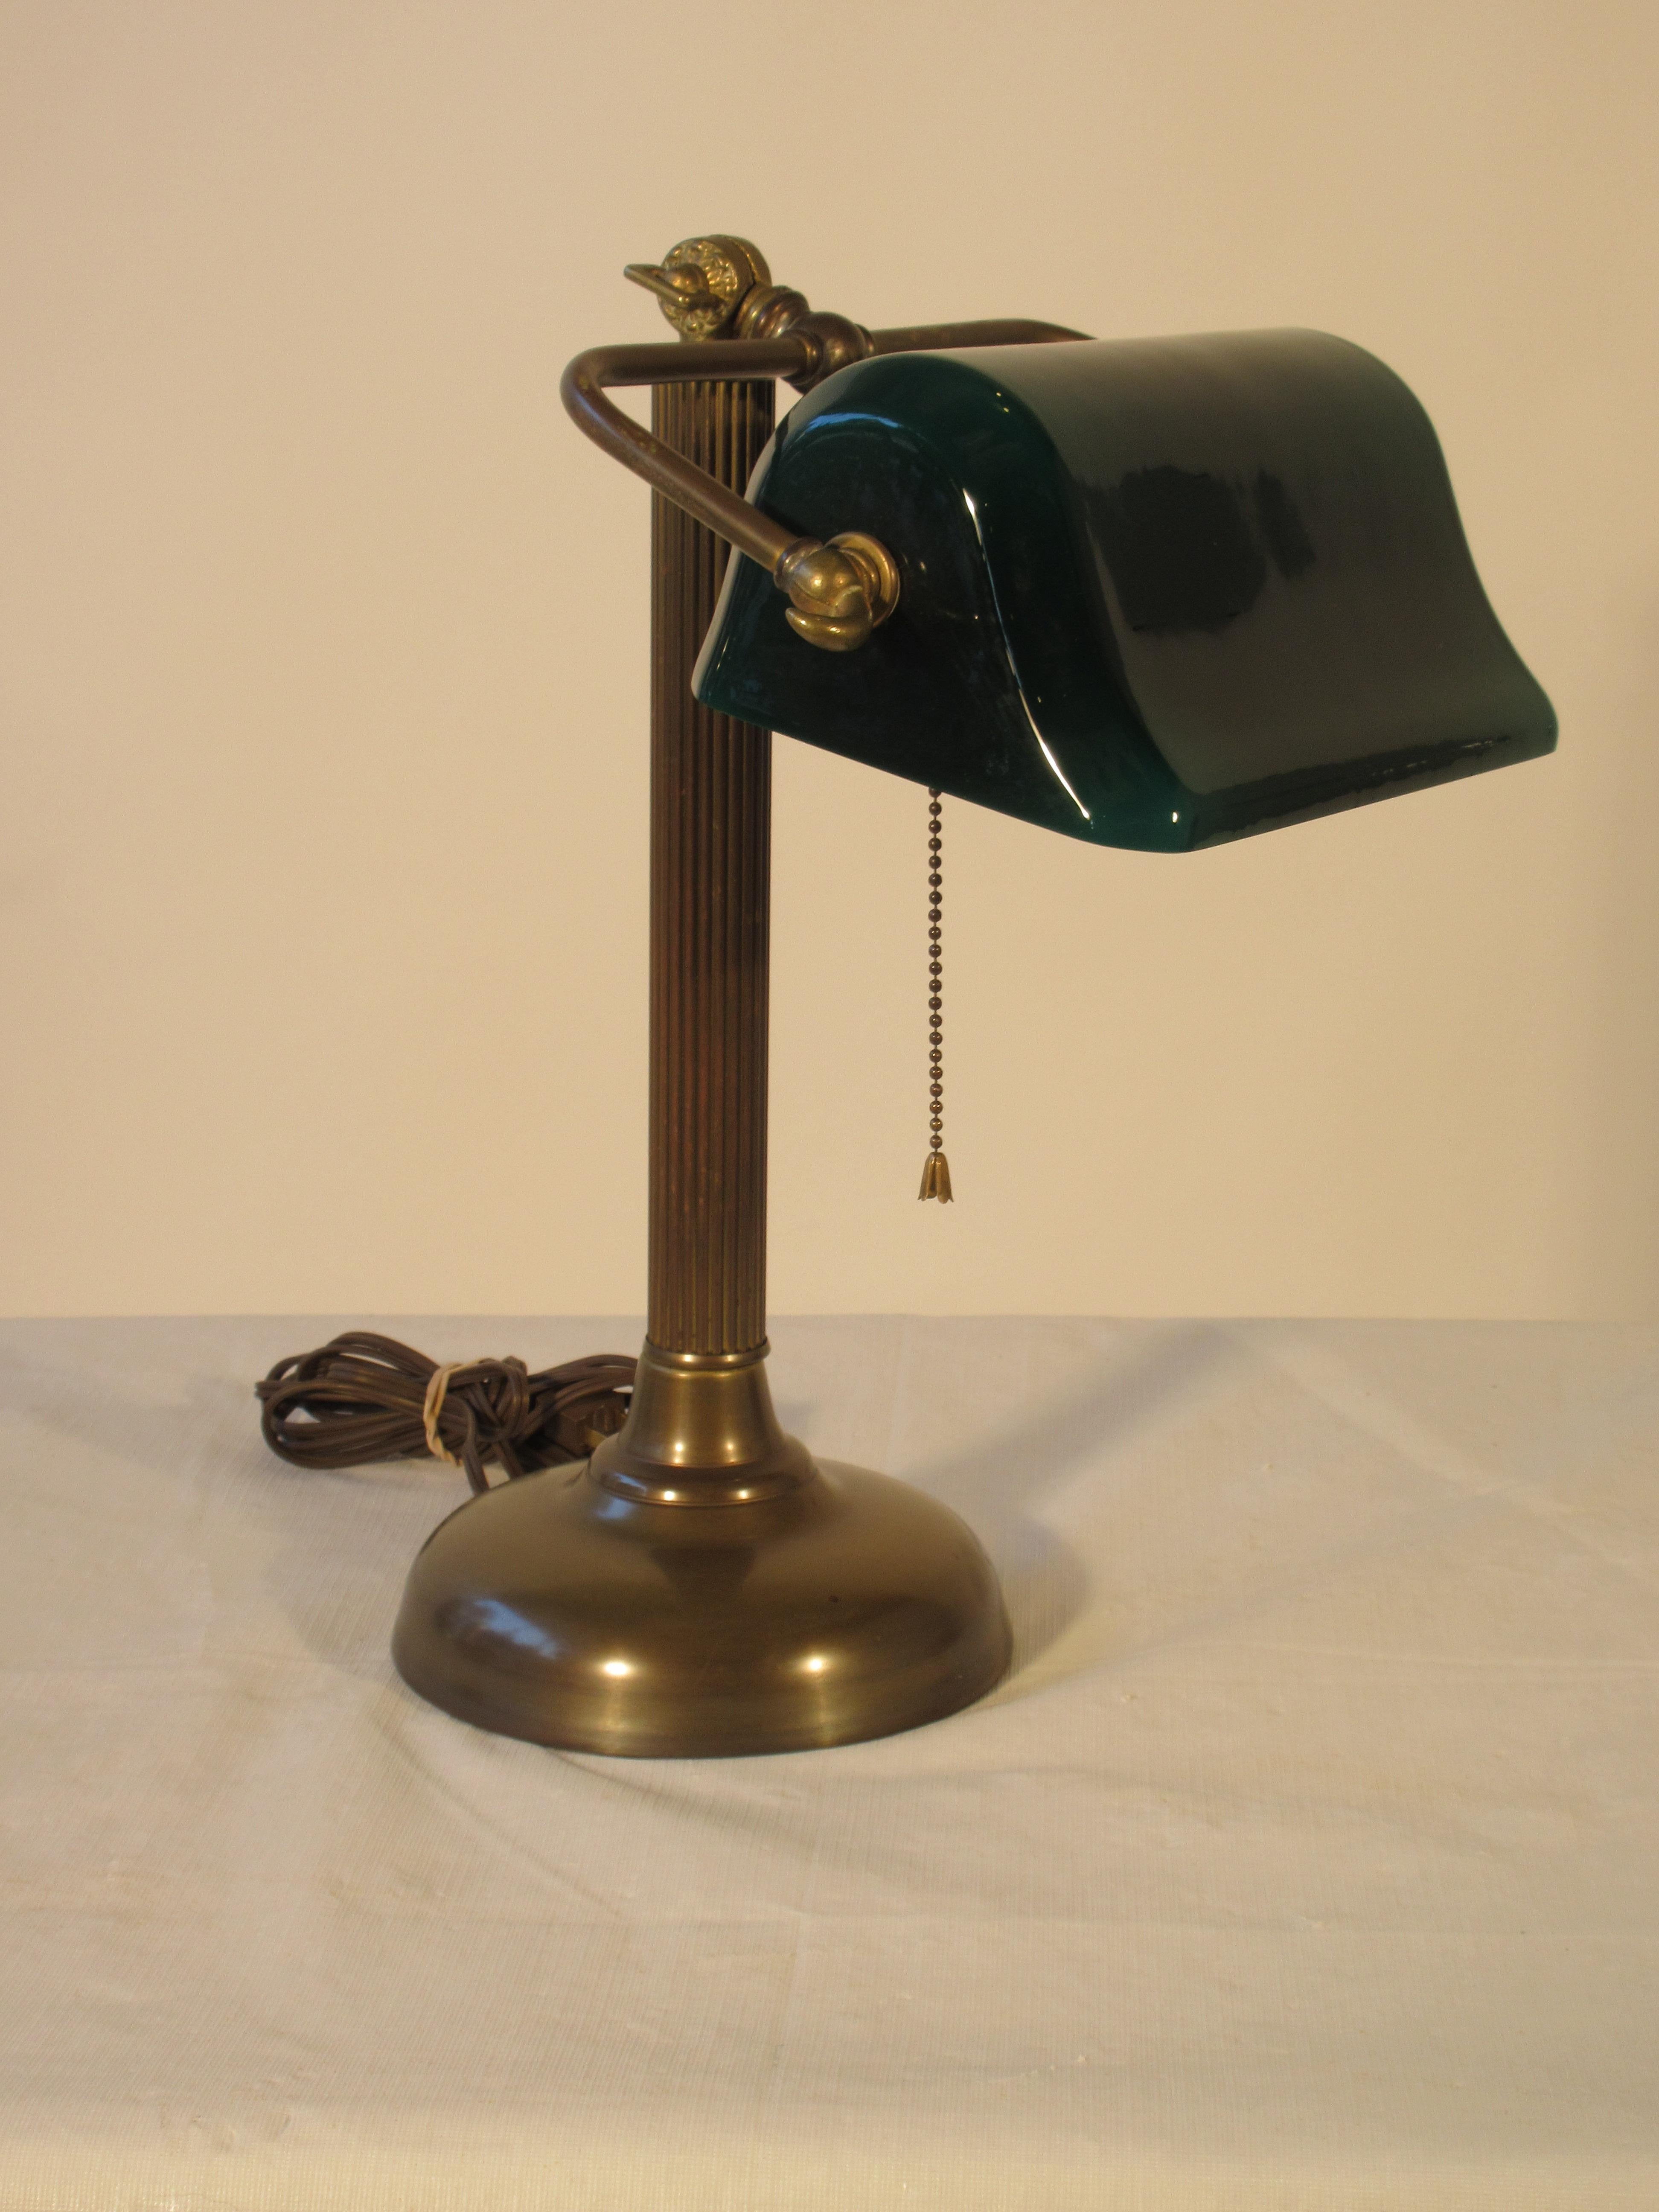 1950s emerald glass and brass desk lamp.